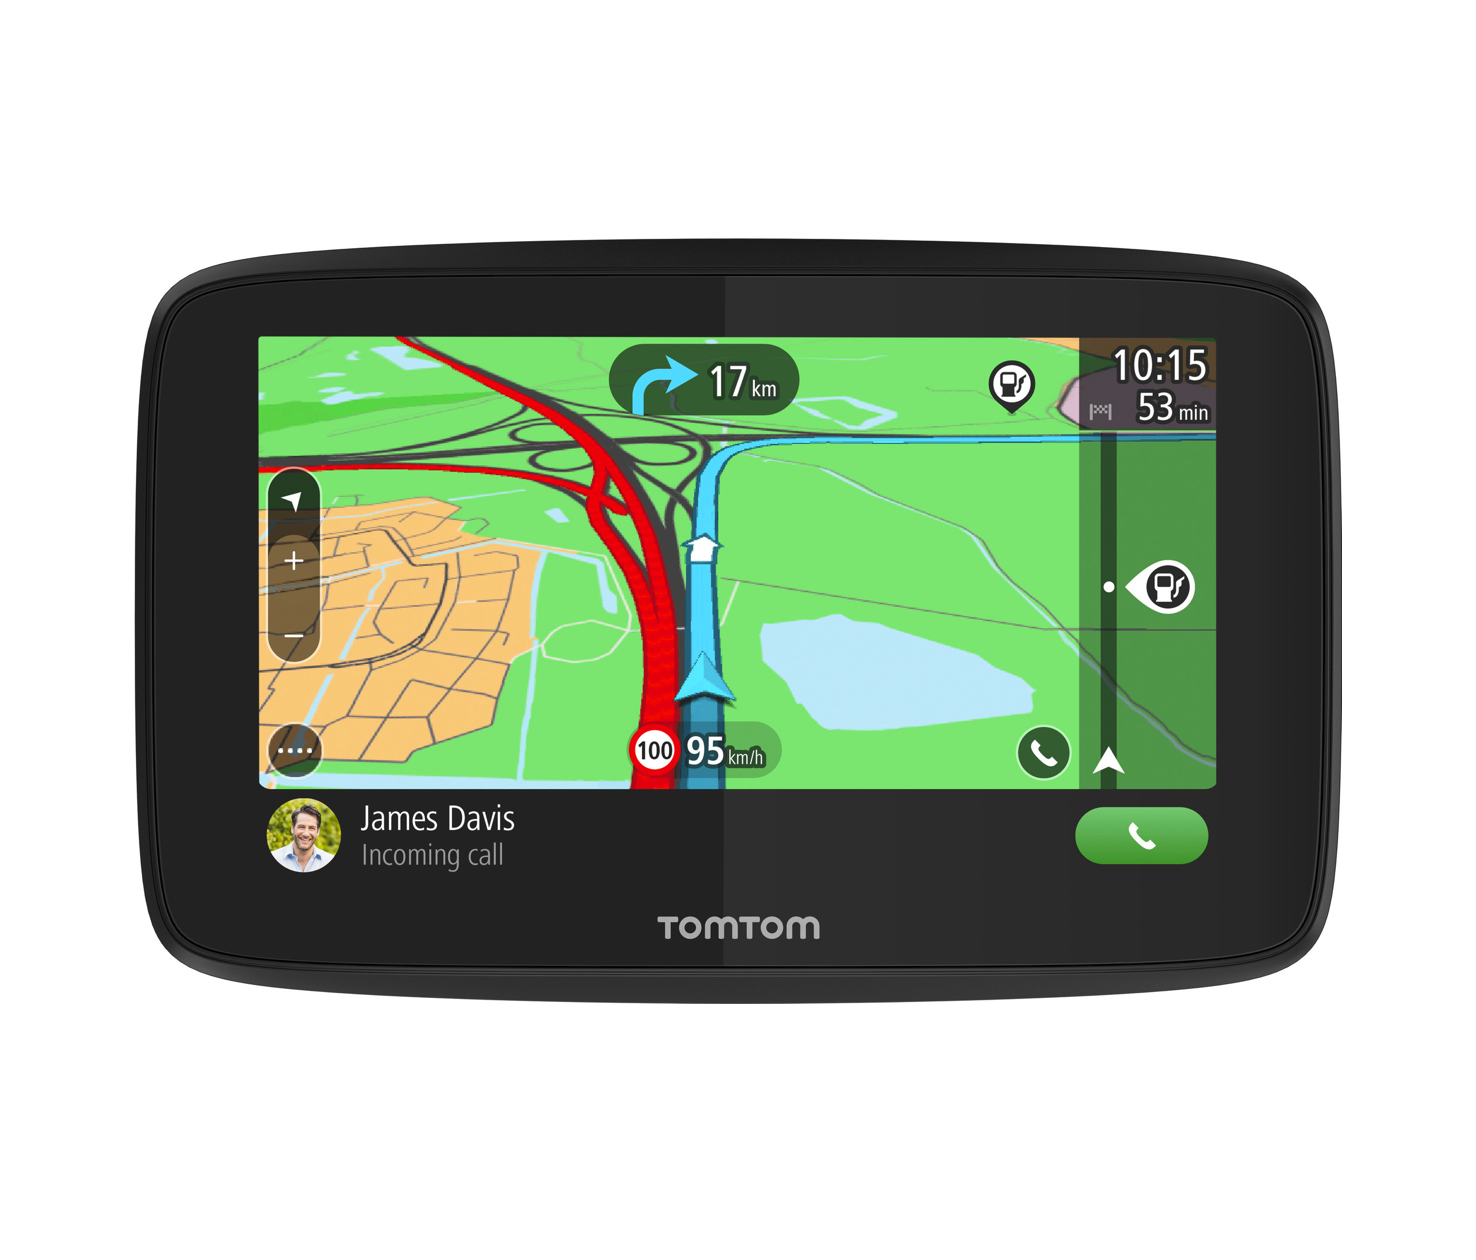 Spoken Turn-by-Turn Directions Us-Can-Mex Advanced Lane Guidance TomTom Go Supreme 6 Wifi with Lifetime Traffic and Maps 